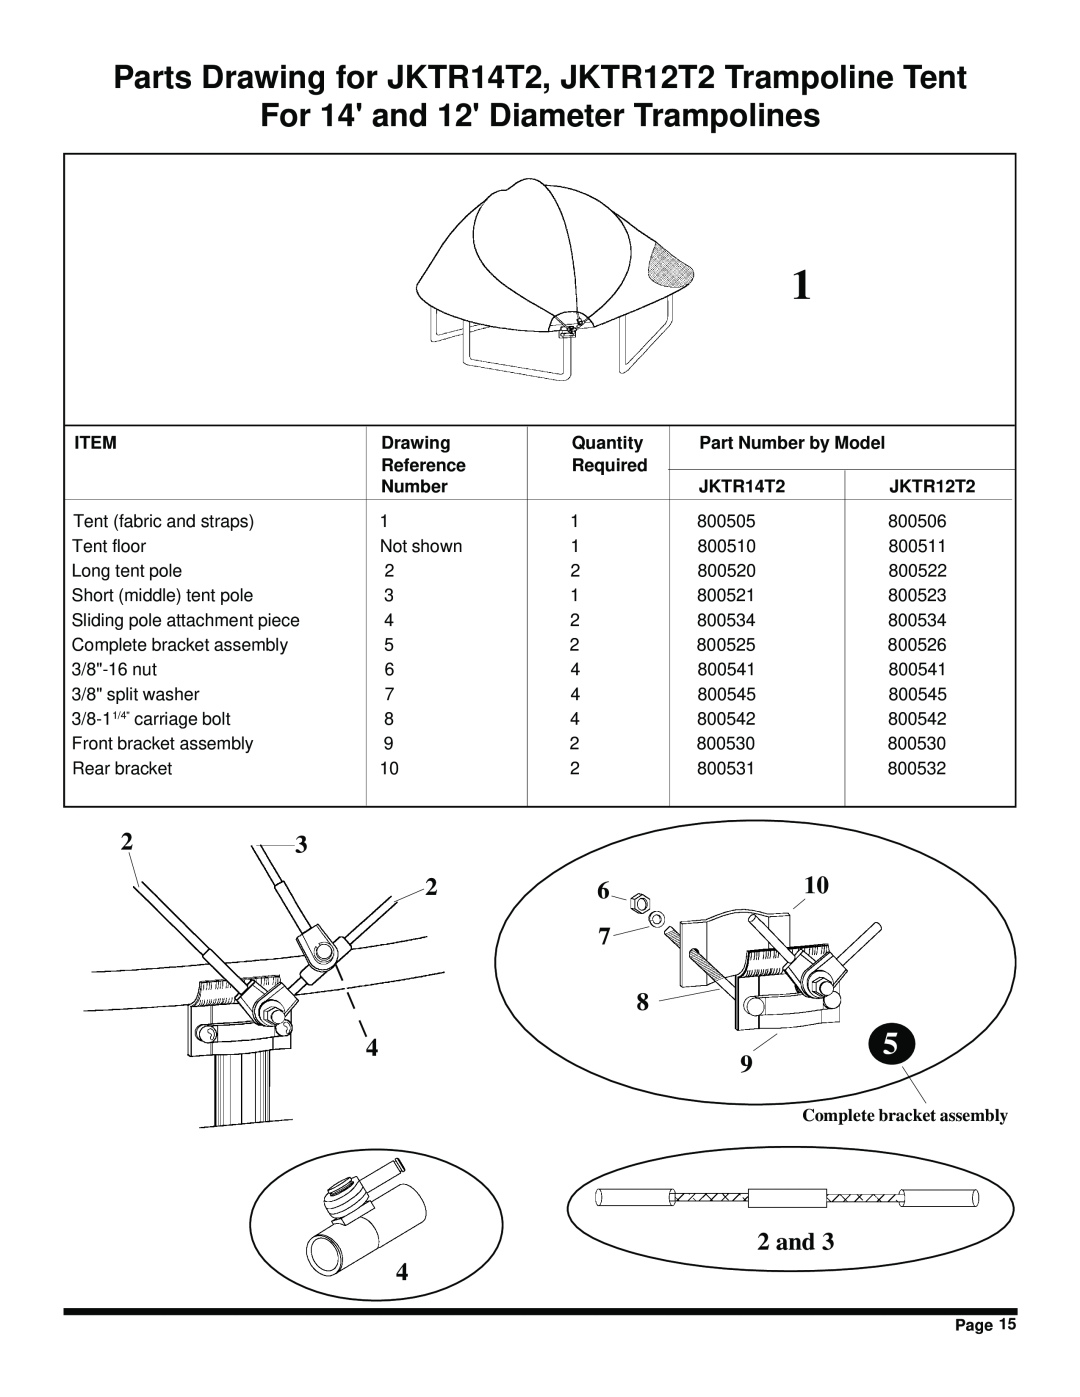 Jumpking Parts Drawing for JKTR14T2, JKTR12T2 Trampoline Tent, For 14 and 12 Diameter Trampolines, 2 and, Quantity 